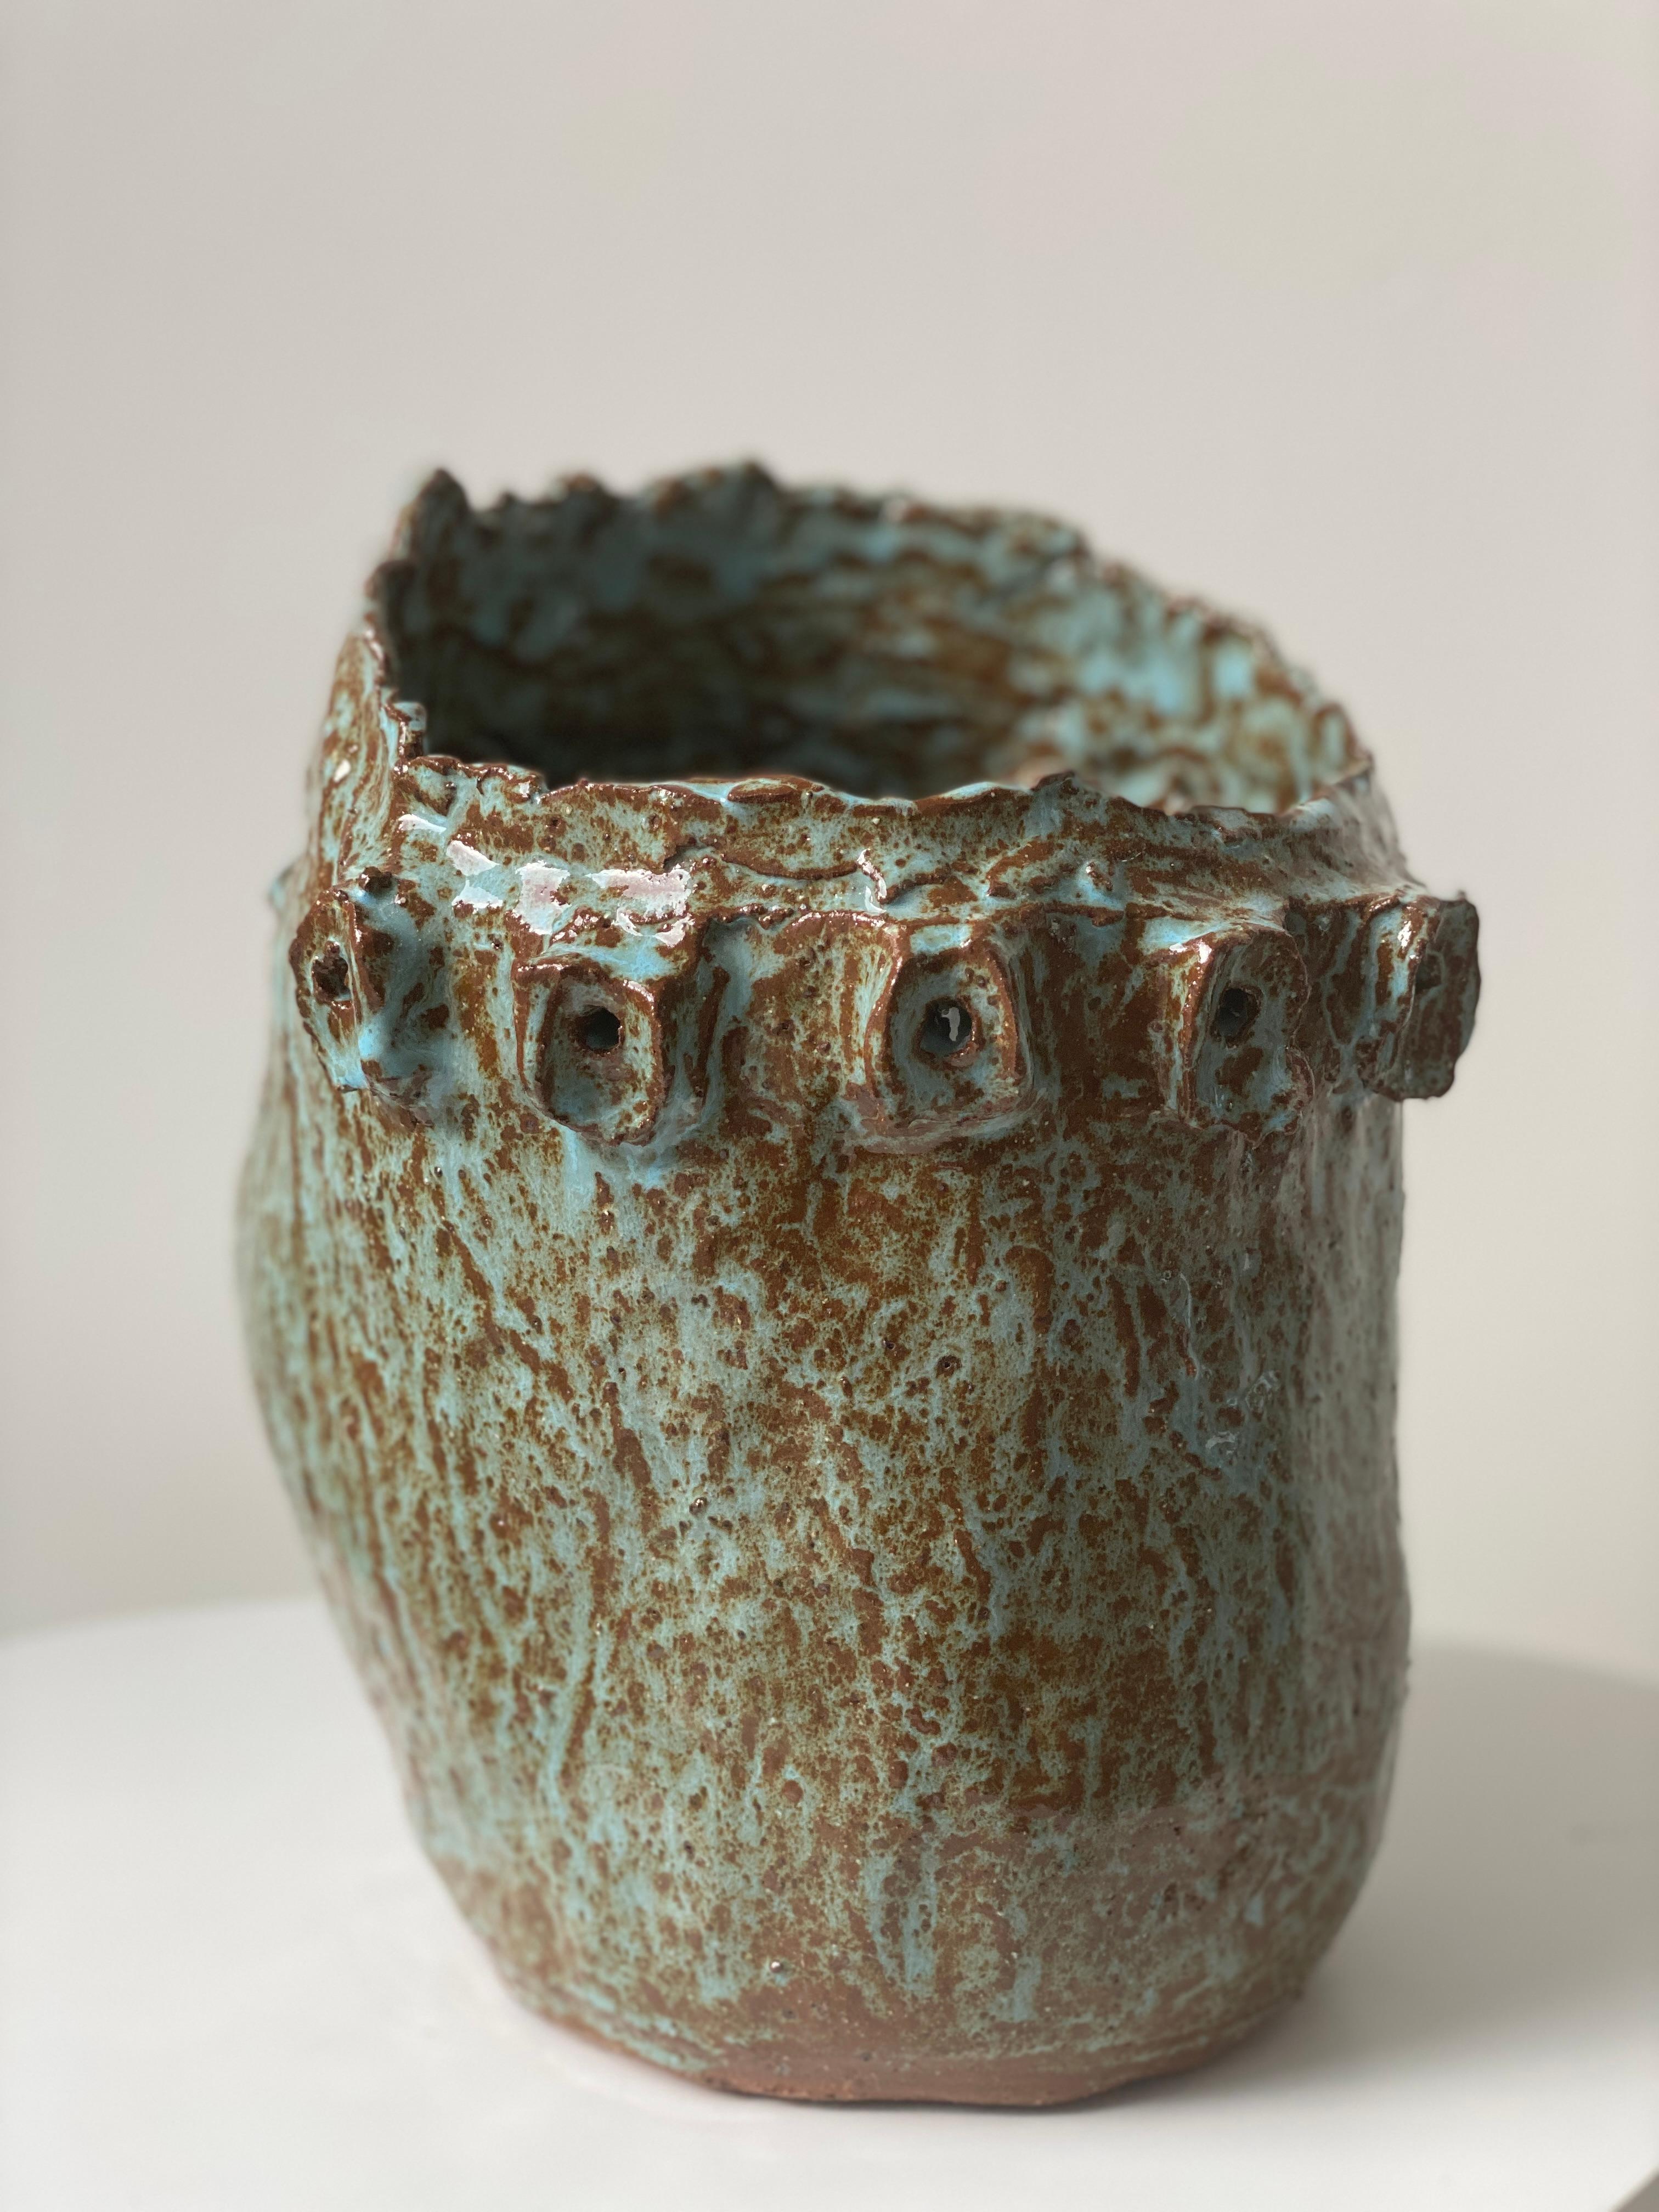 Turquoise sienna rustic wabi sabi hand sculpted glazed clay face vessel ancient  For Sale 2